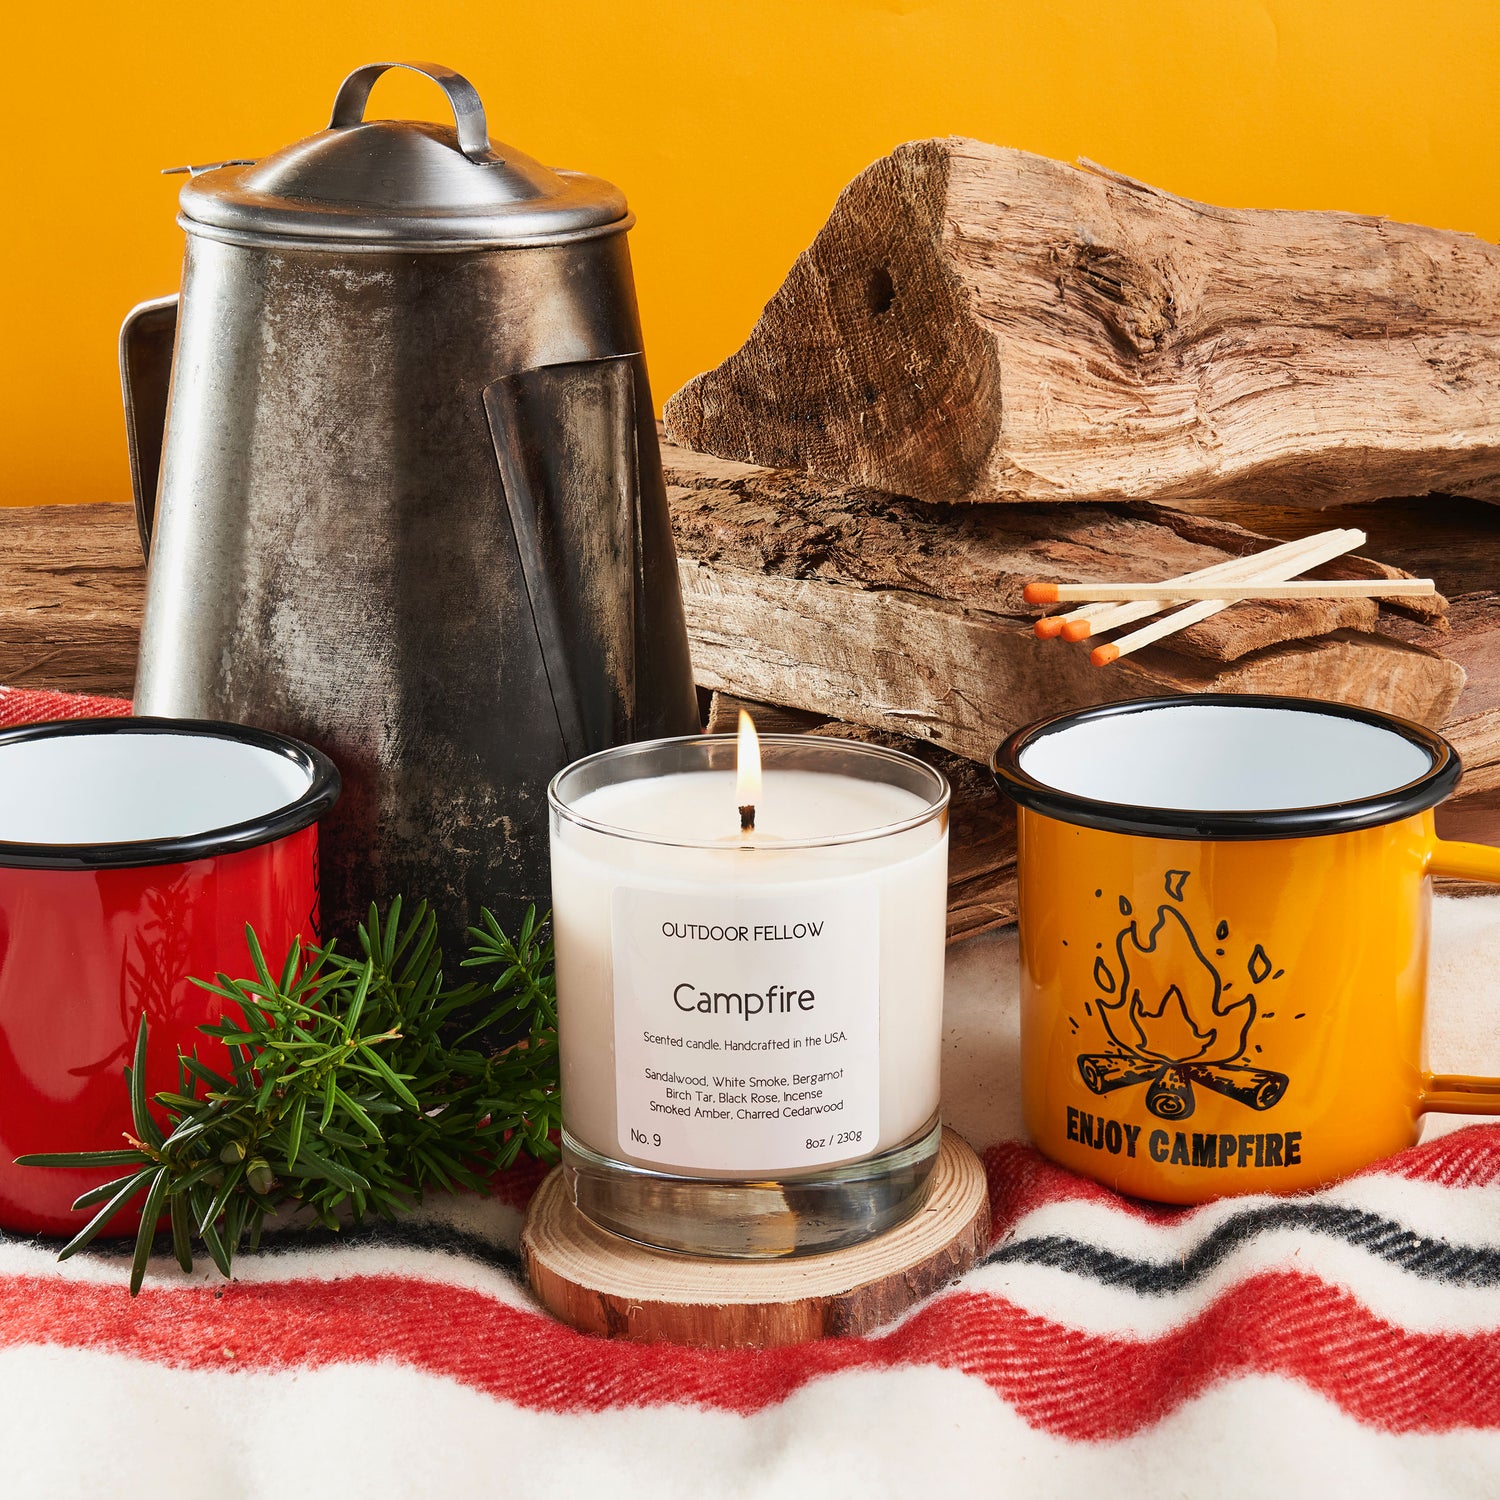 Campfire scented candle on a wool blanket with chopped wood and coffee accessories in the background